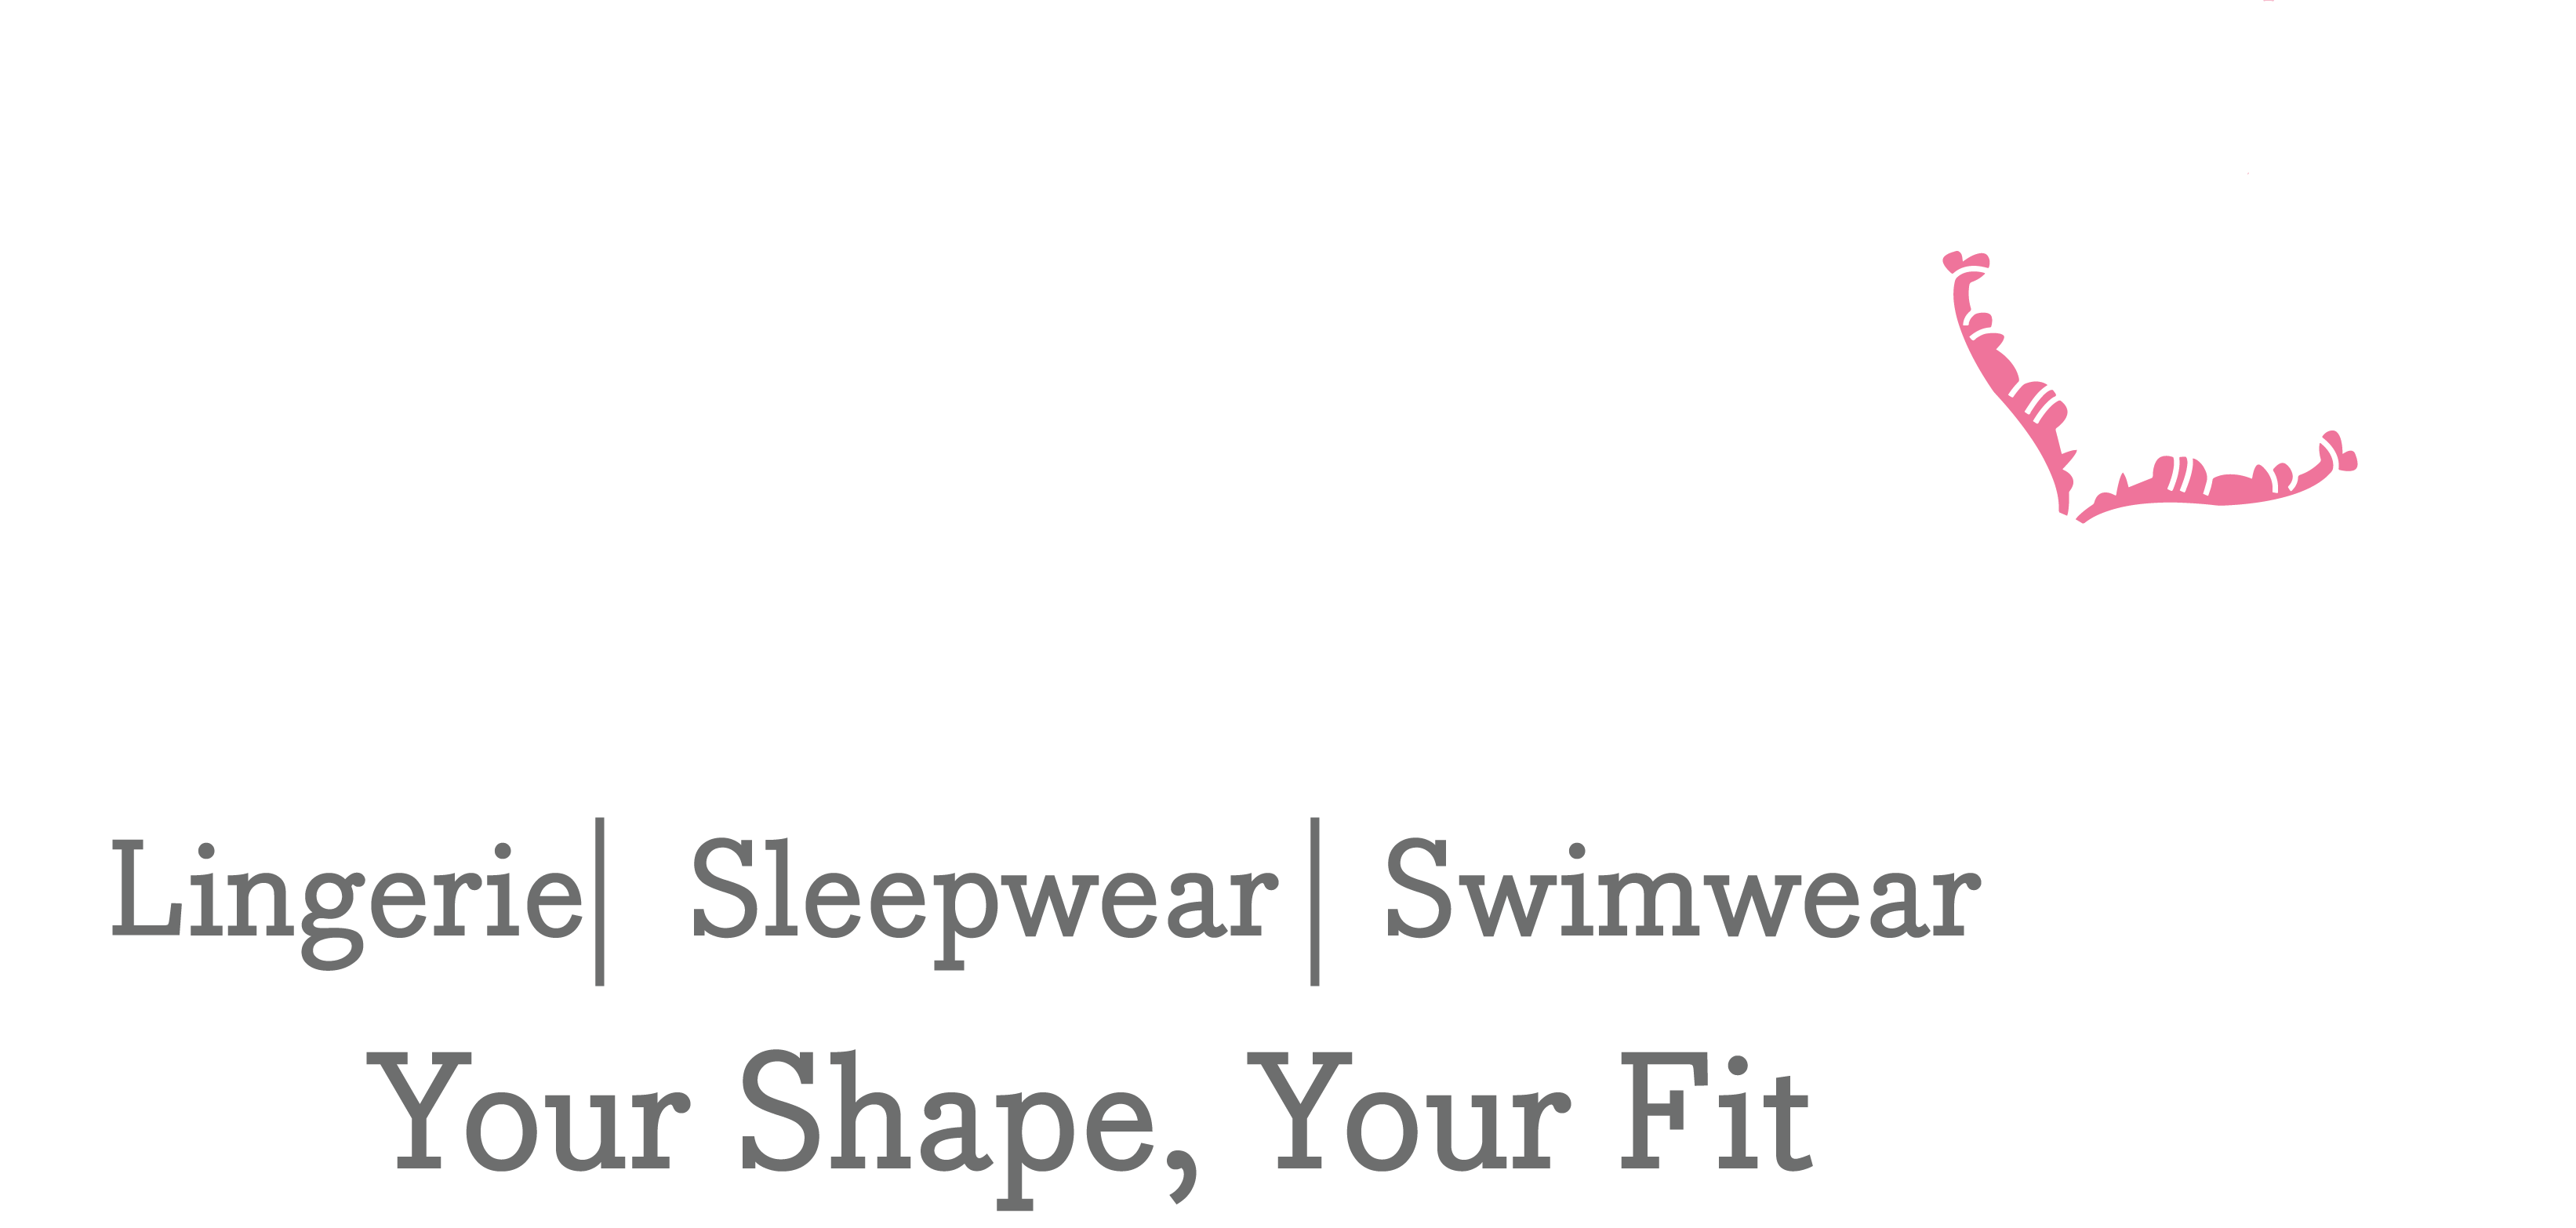 Sample Page - Fashion Foundations